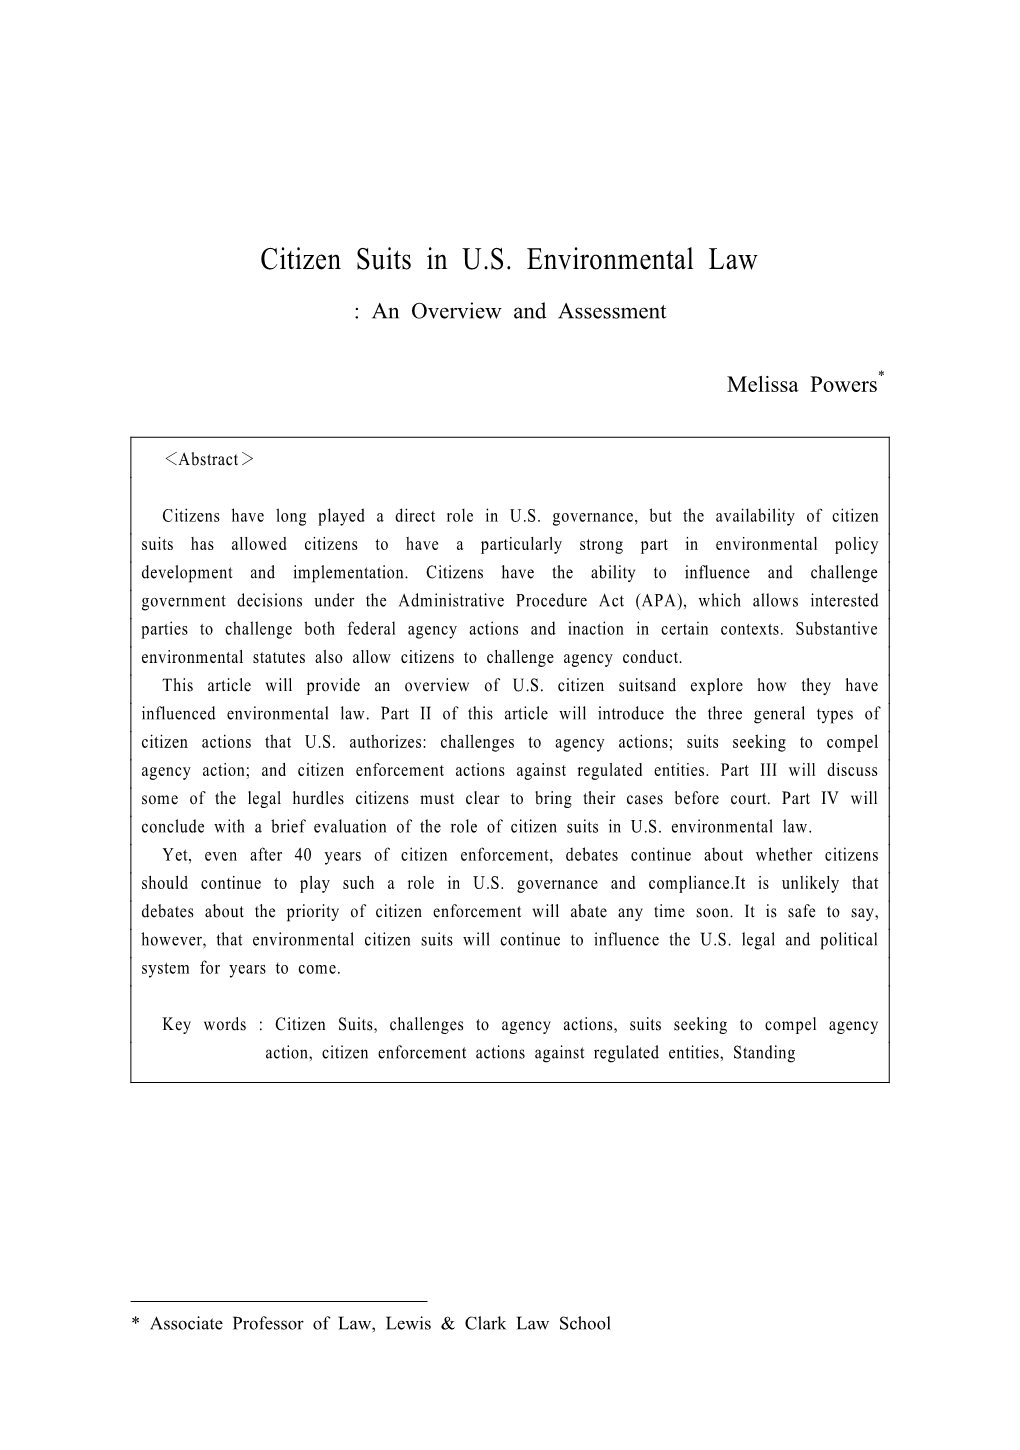 Citizen Suits in U.S. Environmental Law